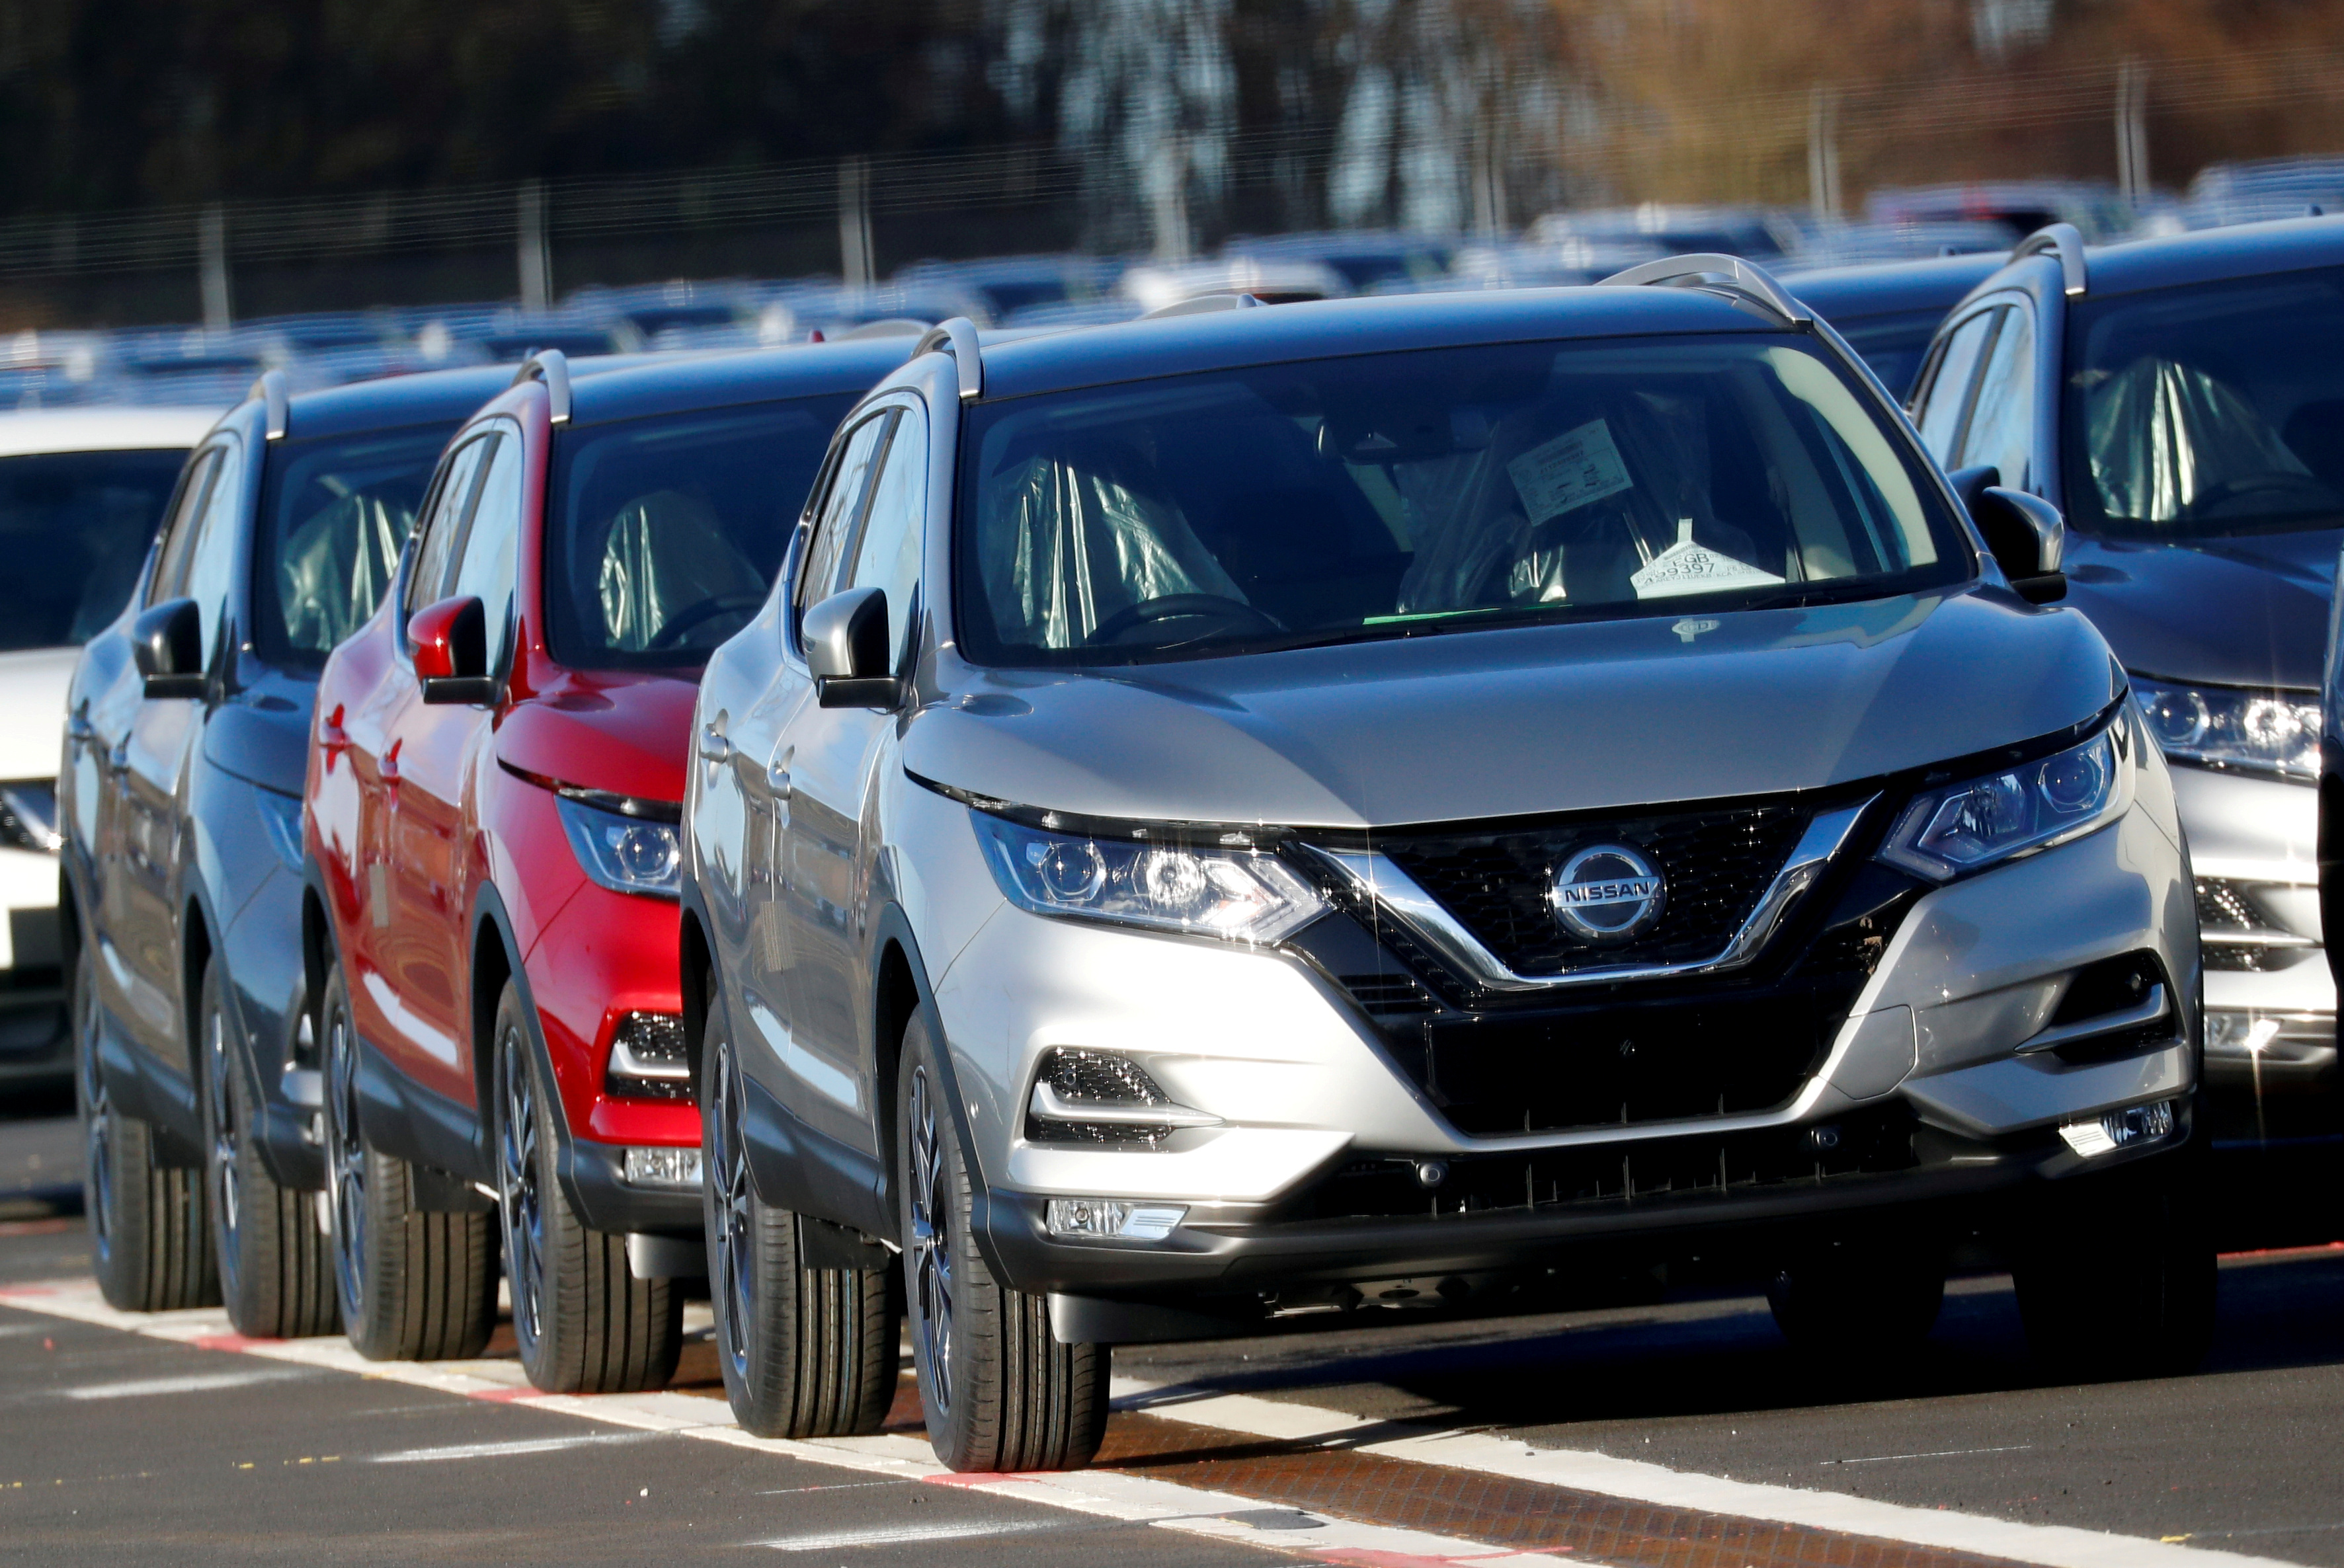 Qashqai cars by Nissan are seen parked at the Nissan car plant in Sunderland